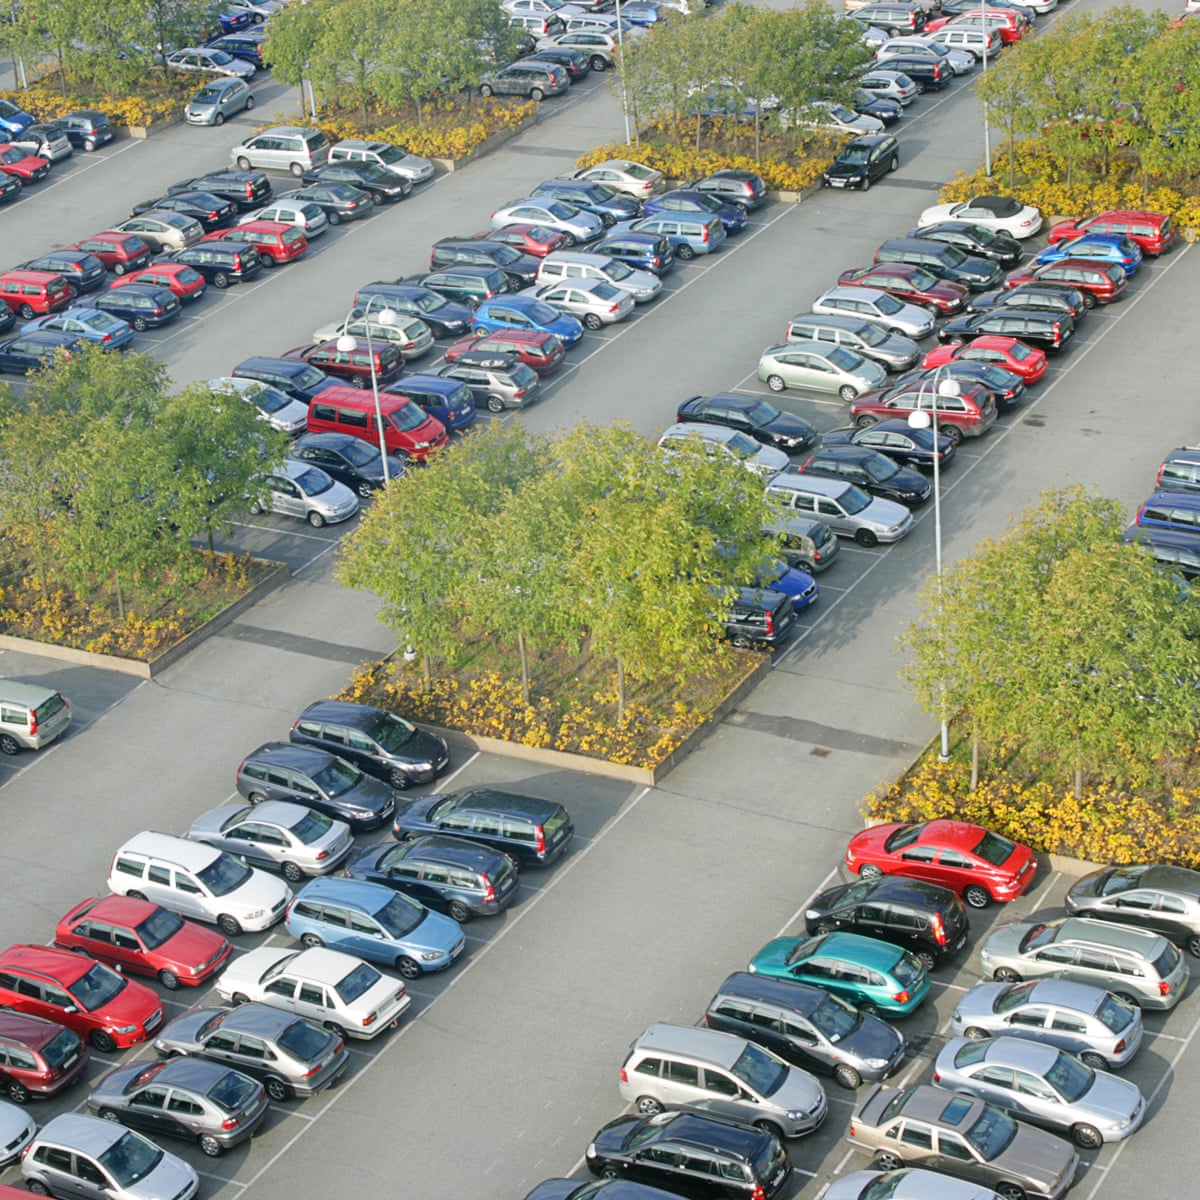 How our cars outgrew our car park spaces, Motoring